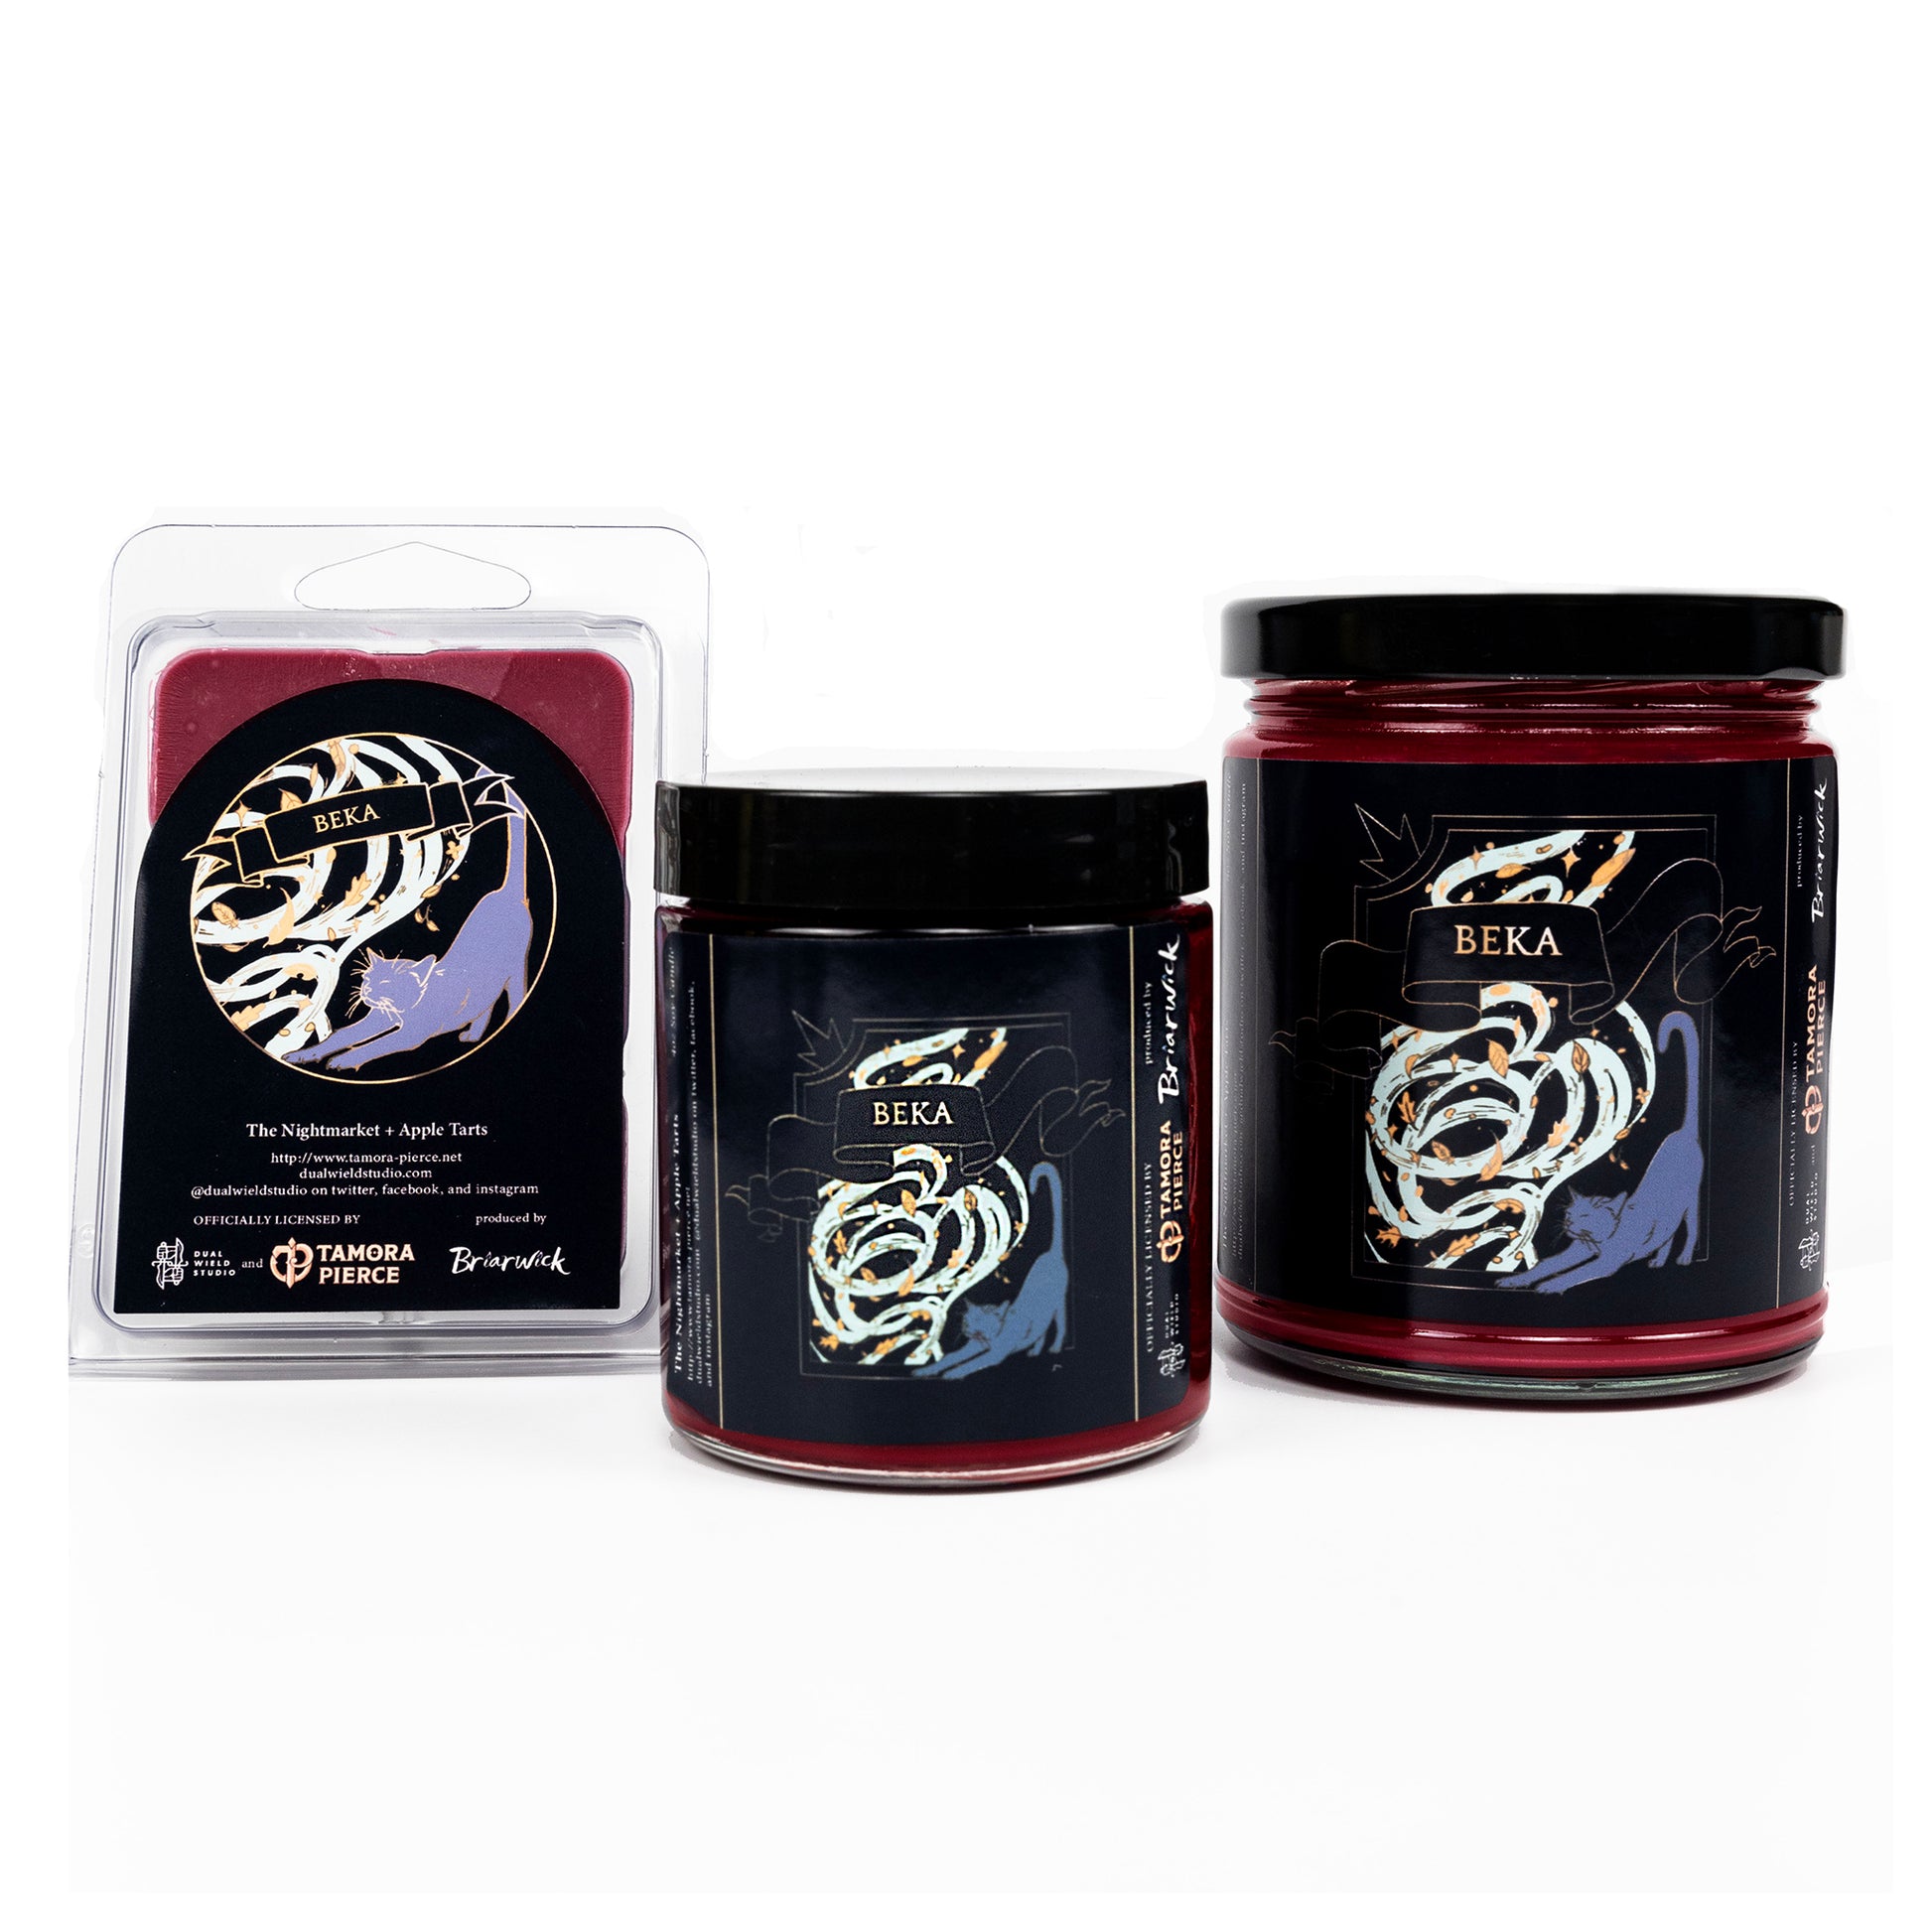 Full set of both Beka candles and wax melts, all with burgundy red wax. The label illustrations show a stretching cat in front of a gust of leaves. "Beka" reads on a ribbon across the top.